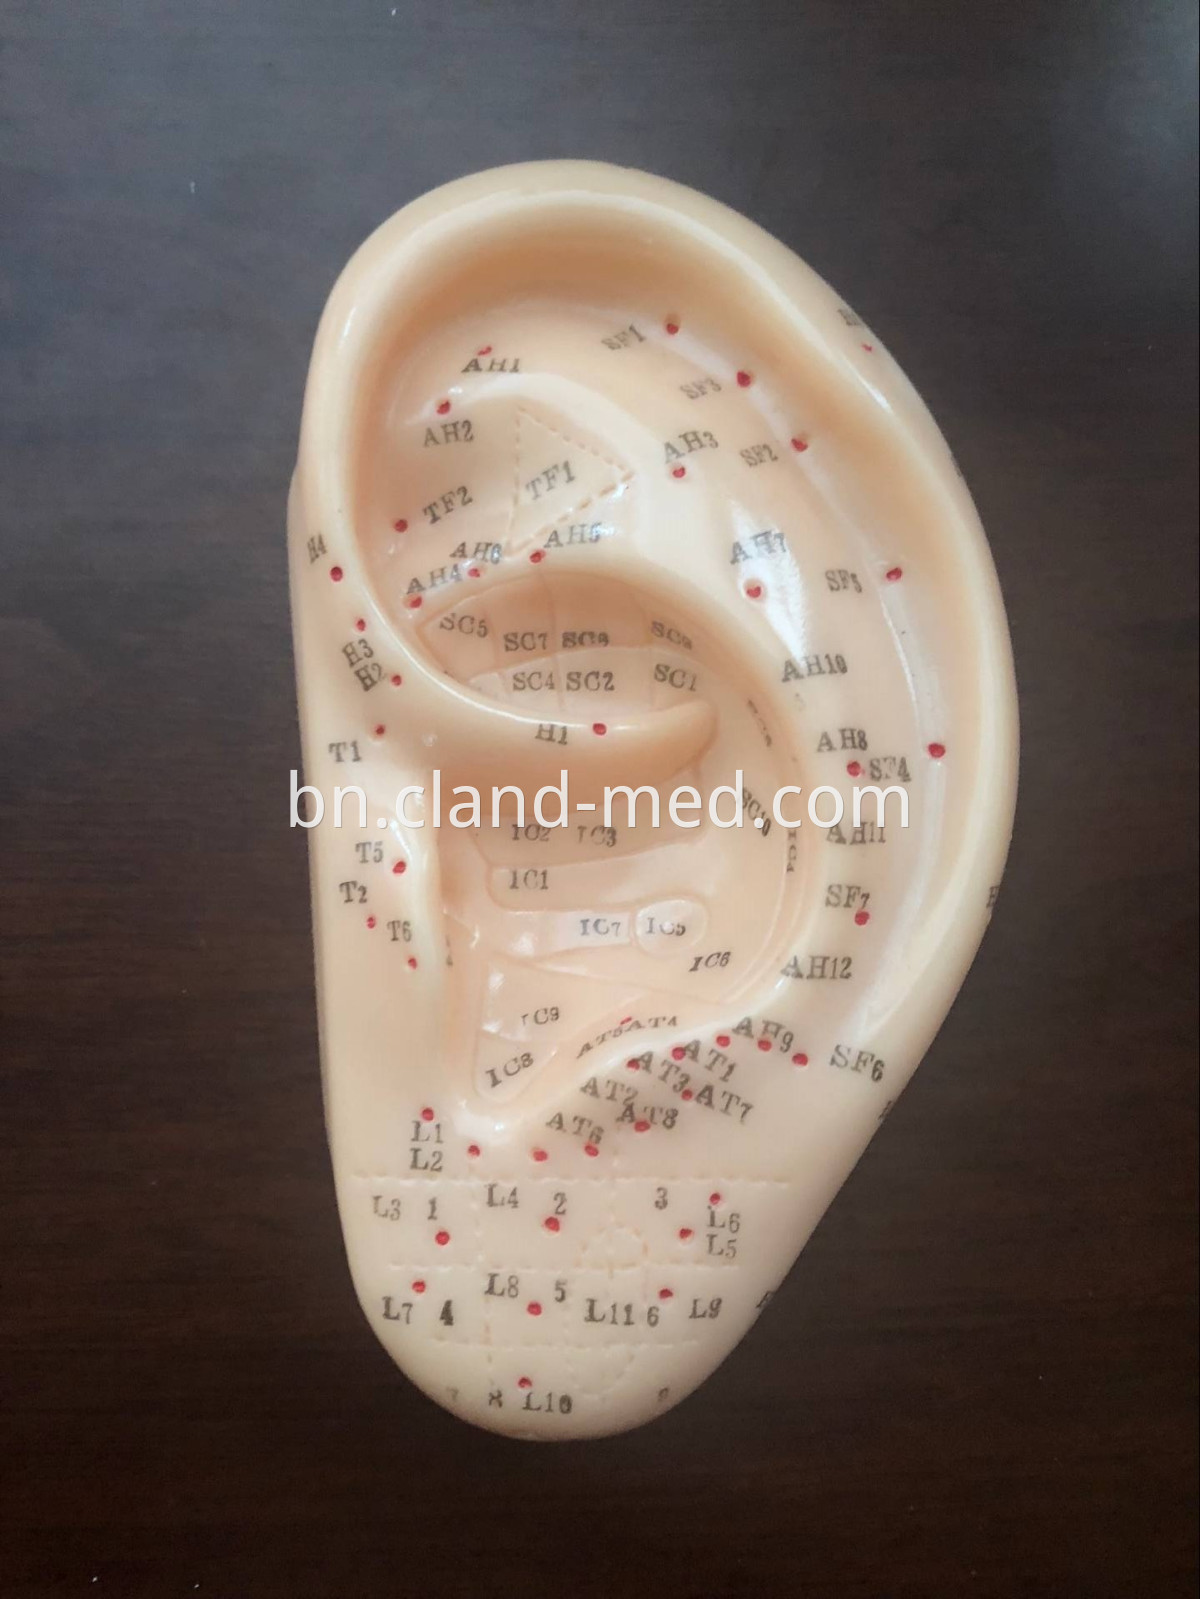 CL-MD0096 EAR ACUPUNCTURE MODEL 2